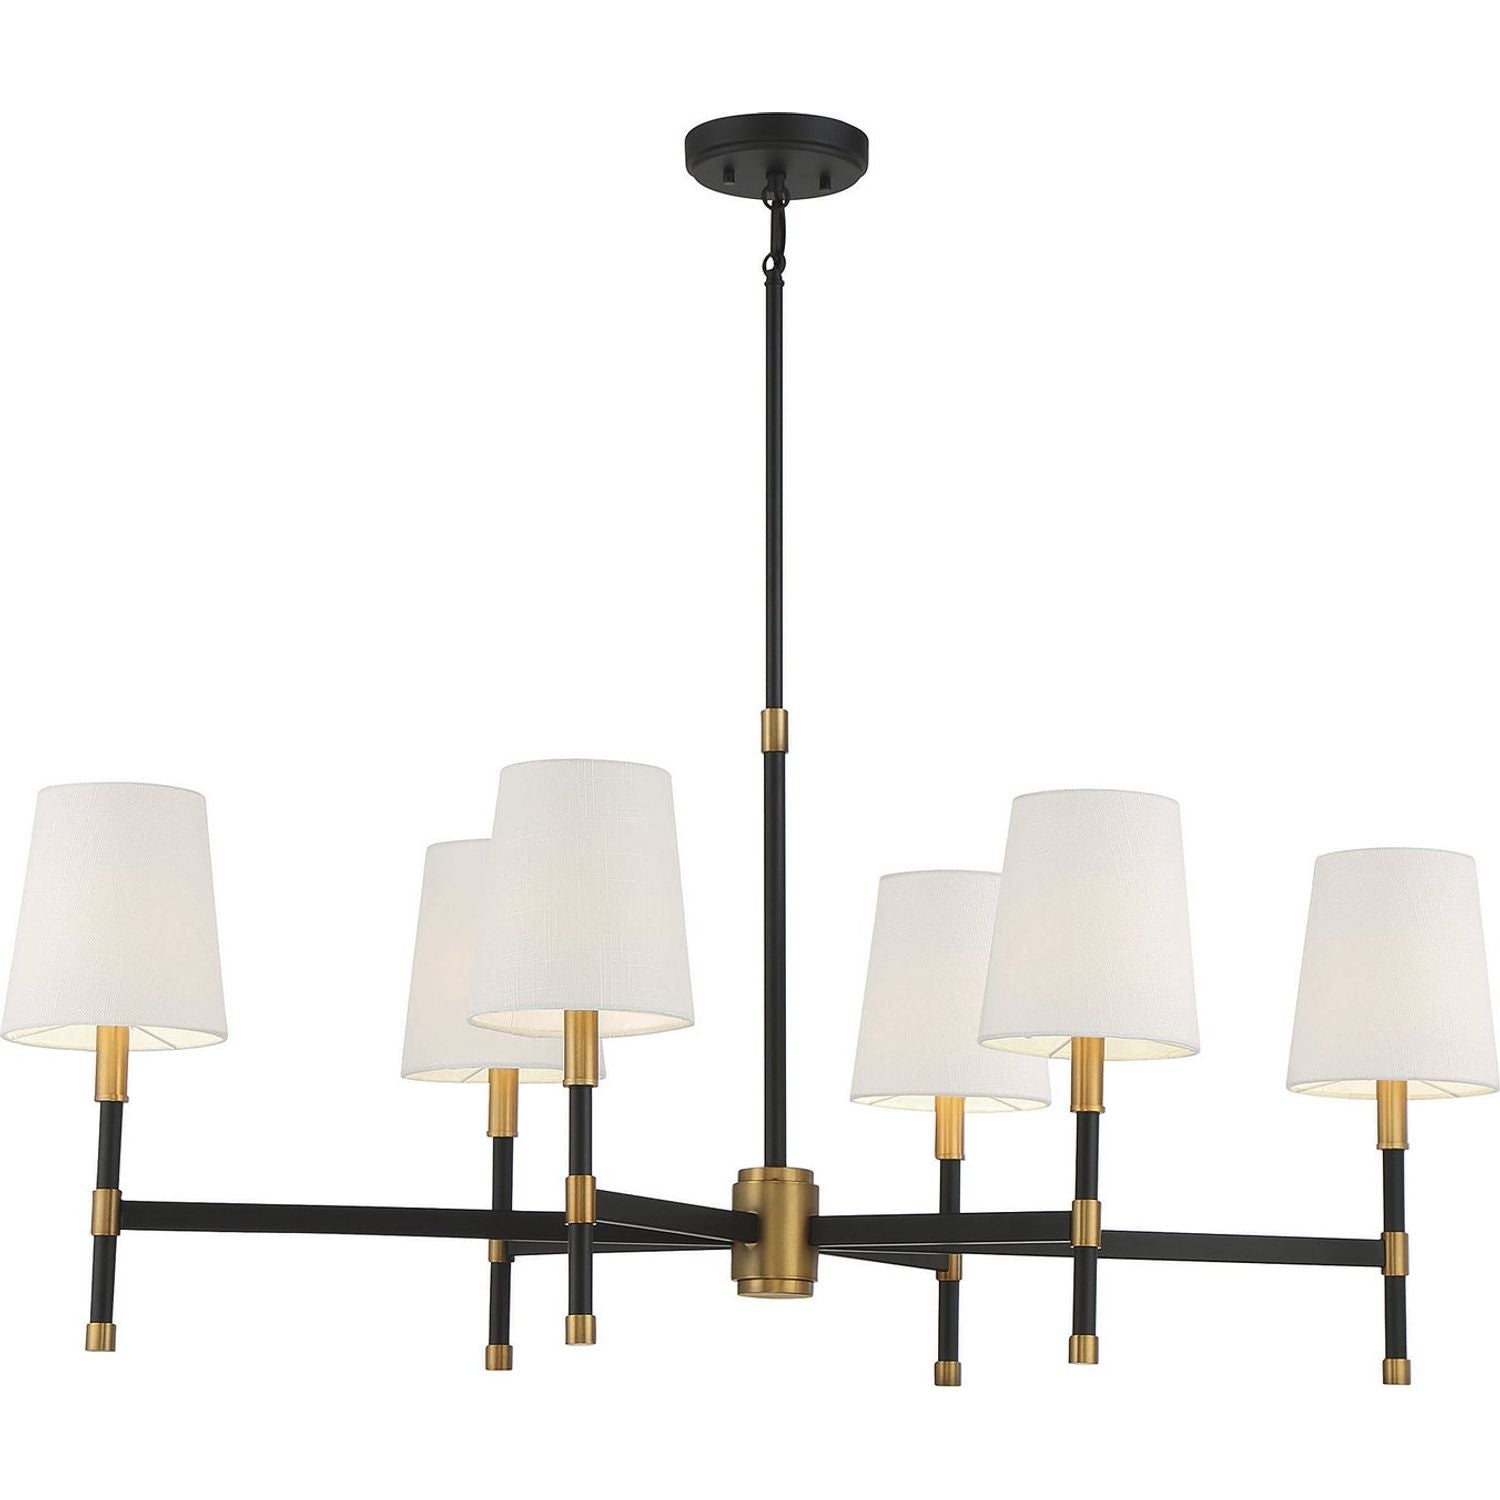 Savoy House - 1-1631-6-143 - Six Light Linear Chandelier - Brody - Matte Black with Warm Brass Accents